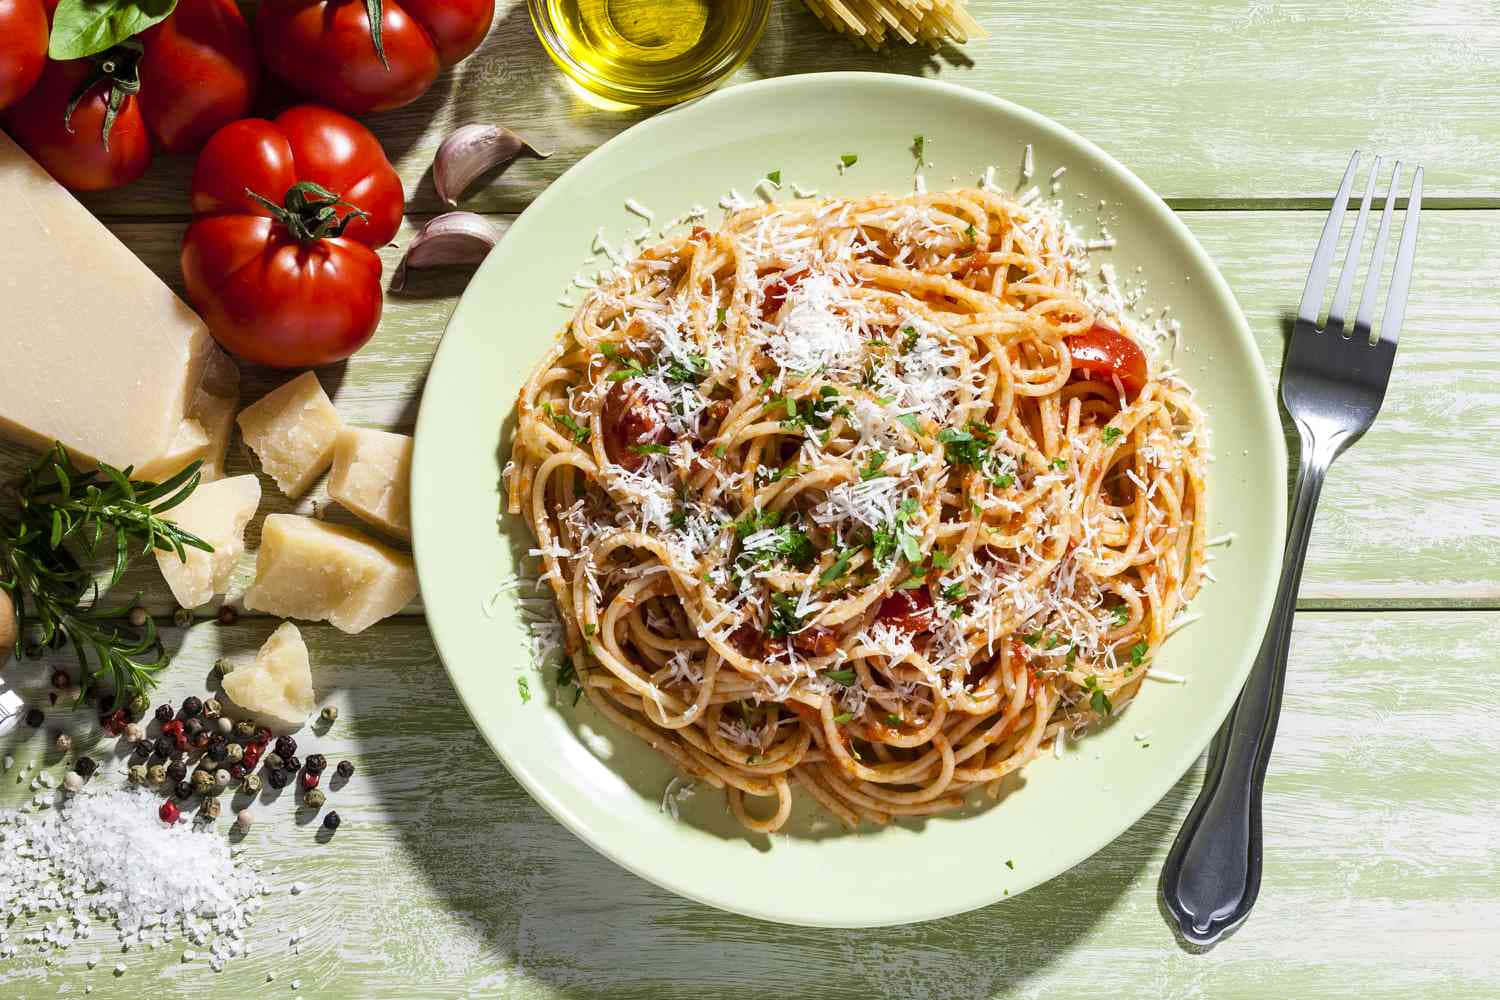 A Plate Of Spaghetti With Tomatoes, Parmesan Cheese And Other Ingredients Wallpaper